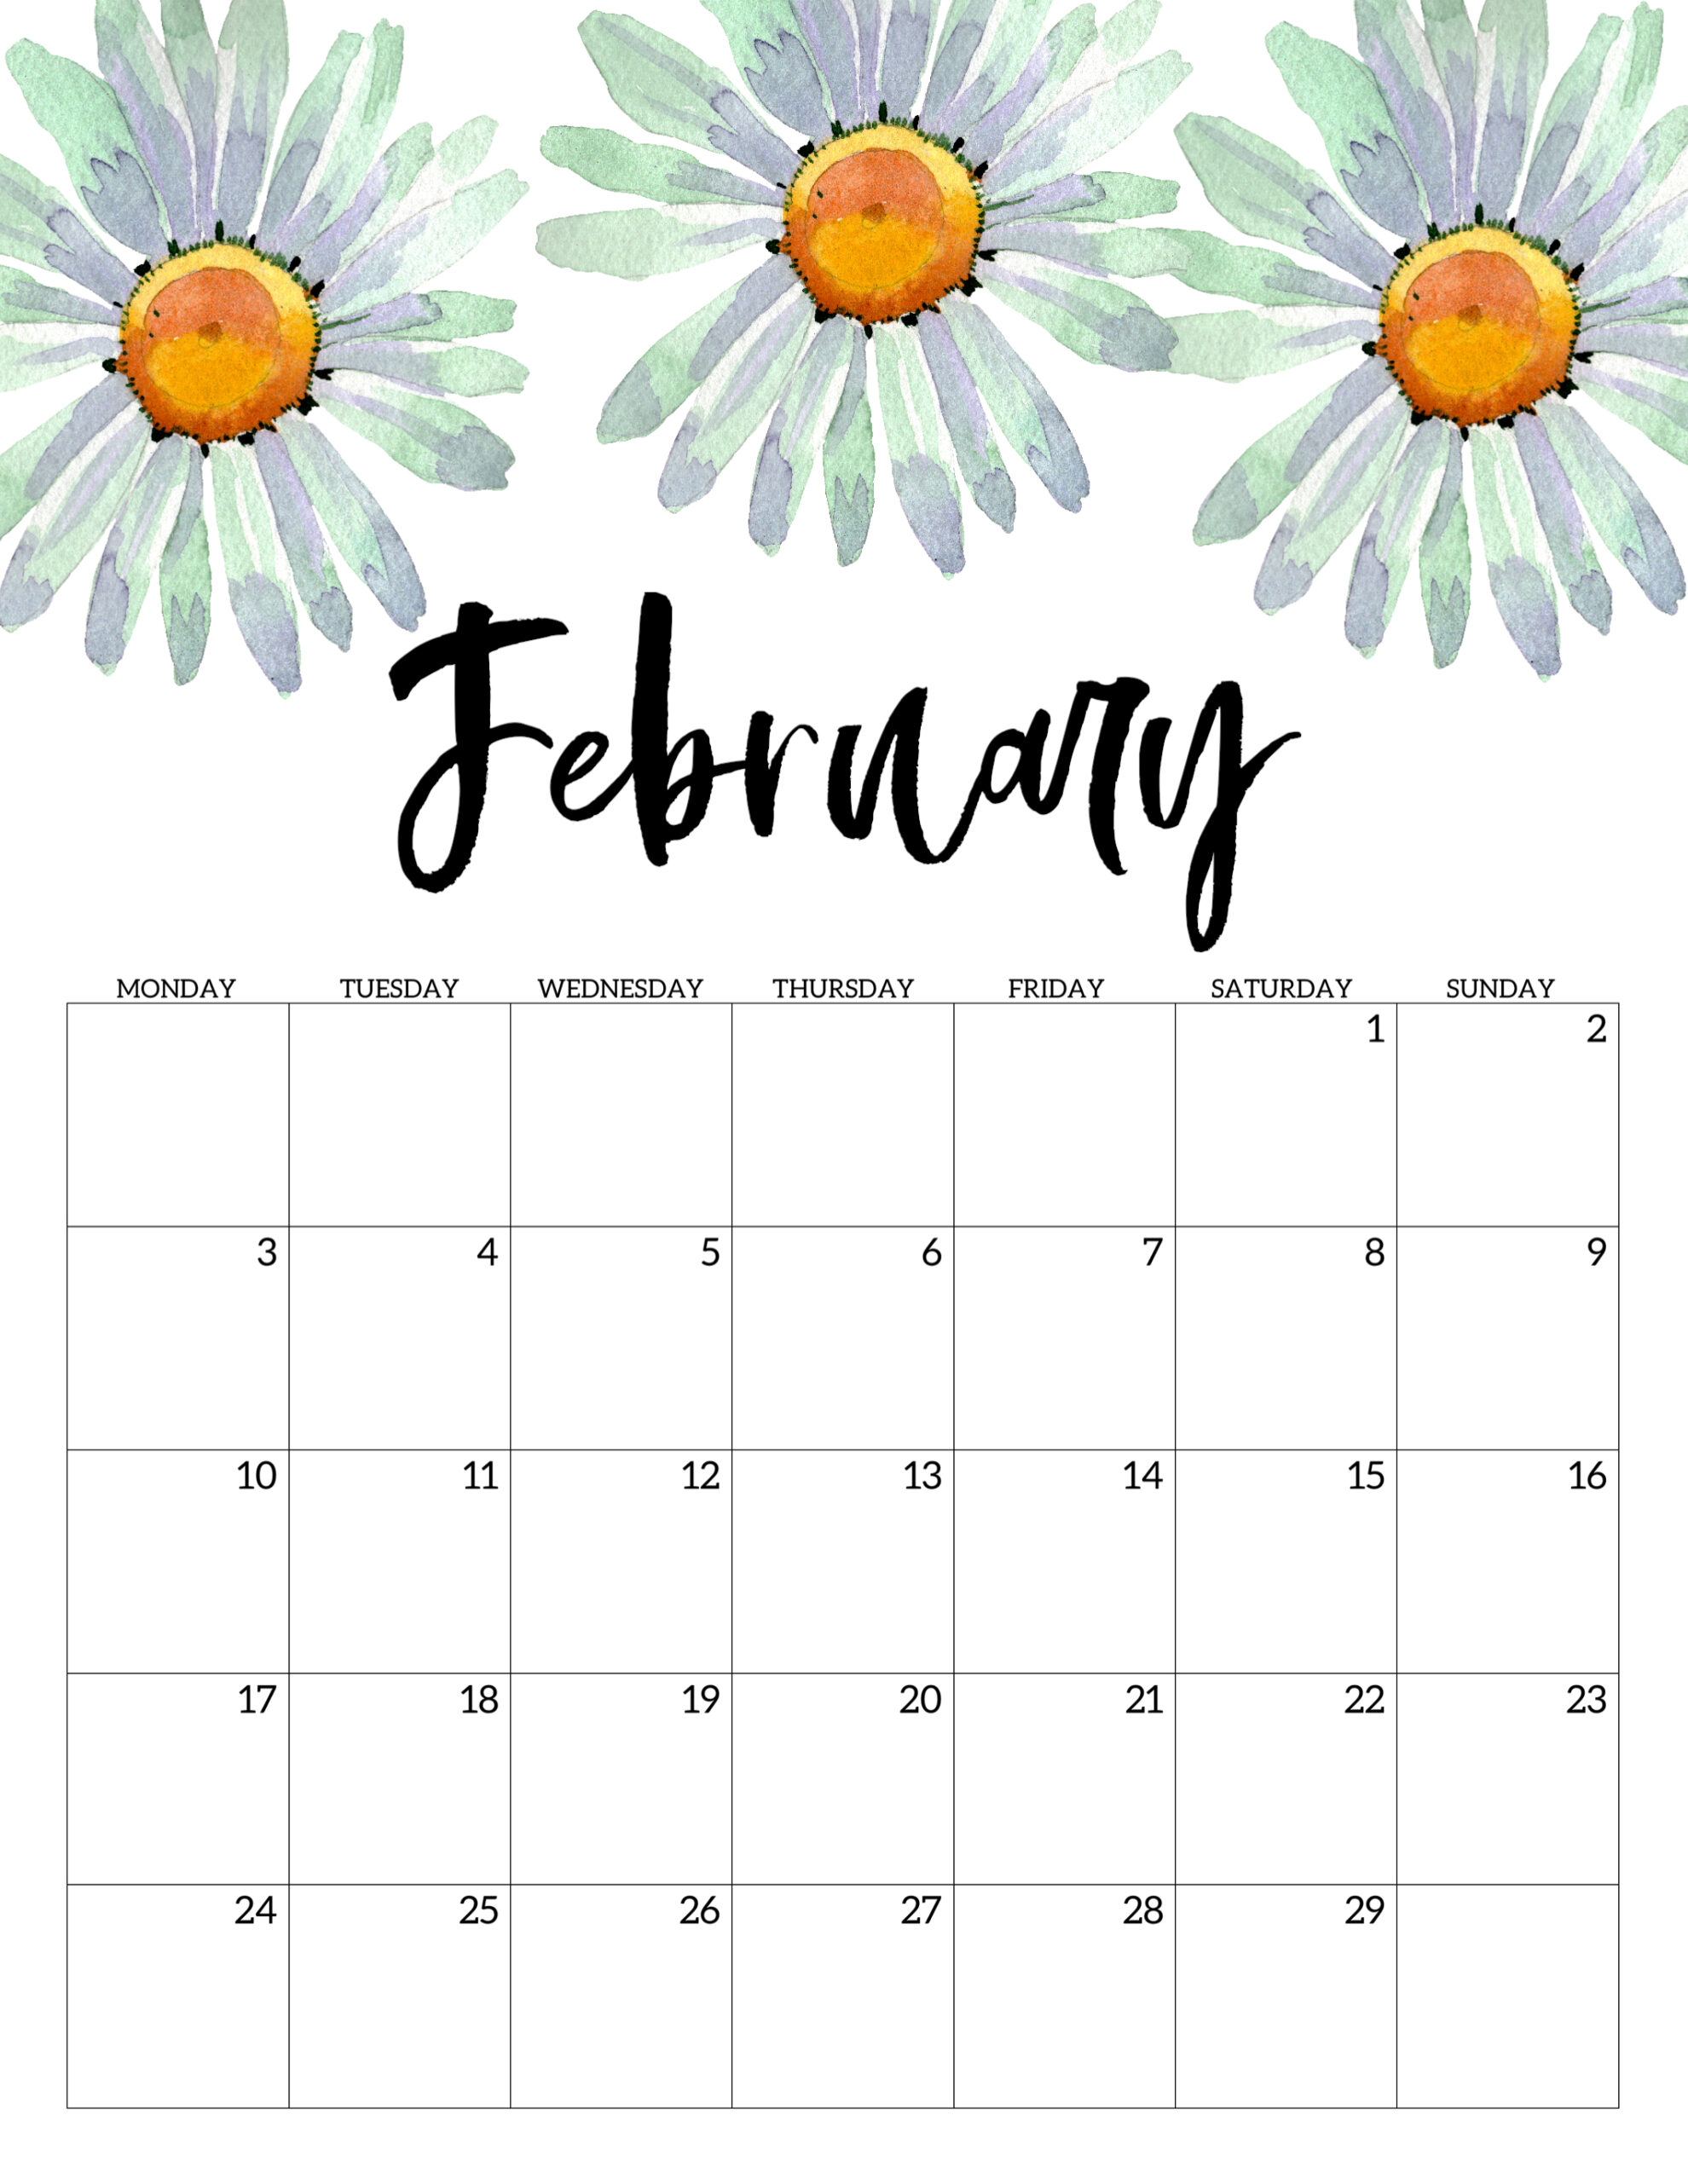 February 2020 Calendar Aesthetic Largest Wallpaper Portal Simple monthly planner and calendar for february 2021. february 2020 calendar aesthetic